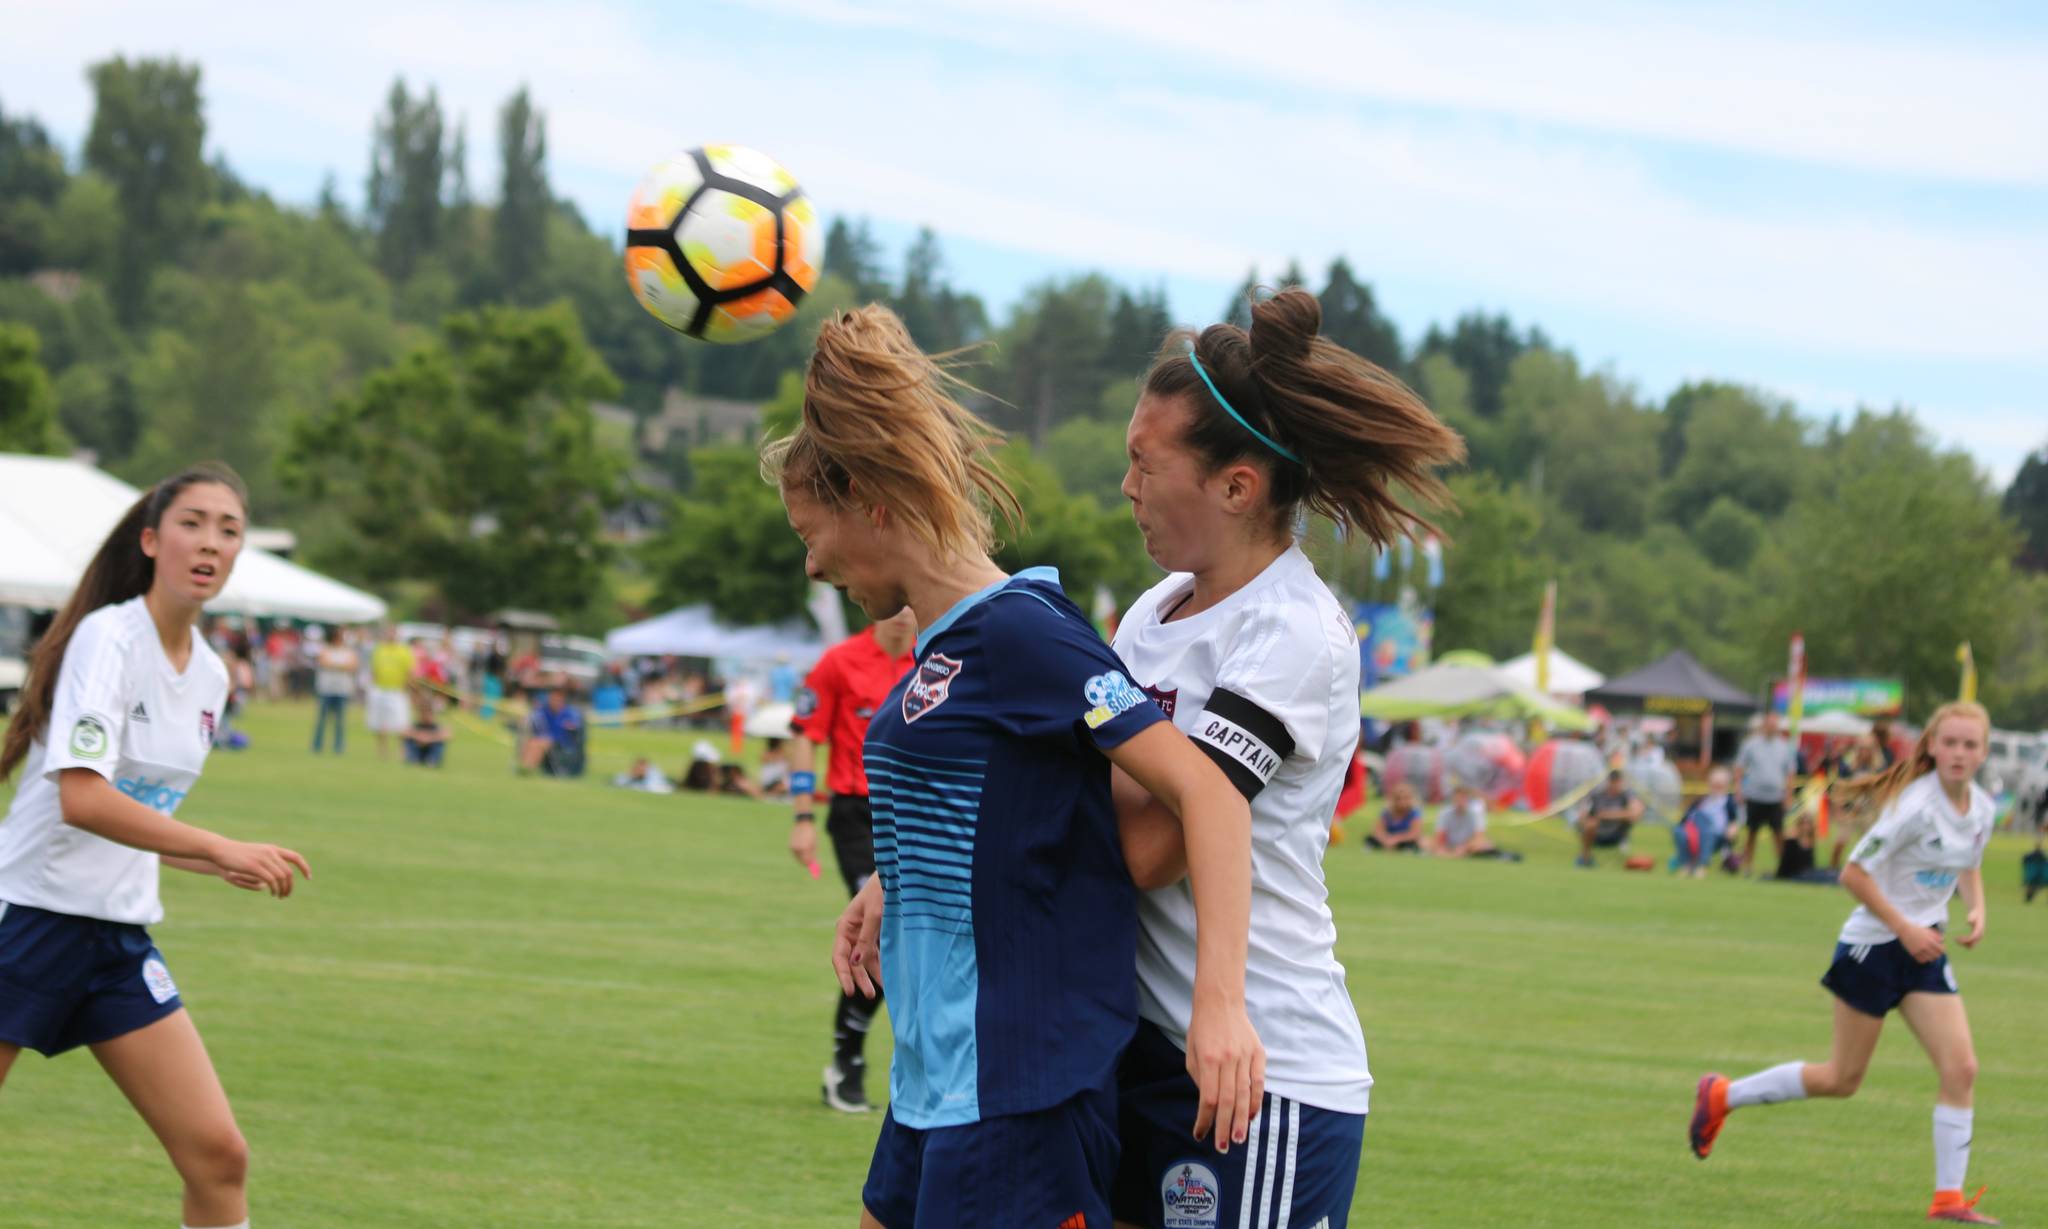 U.S. Youth Soccer dribbles 2017 Region IV Championships to Redmond’s 60 Acres complex